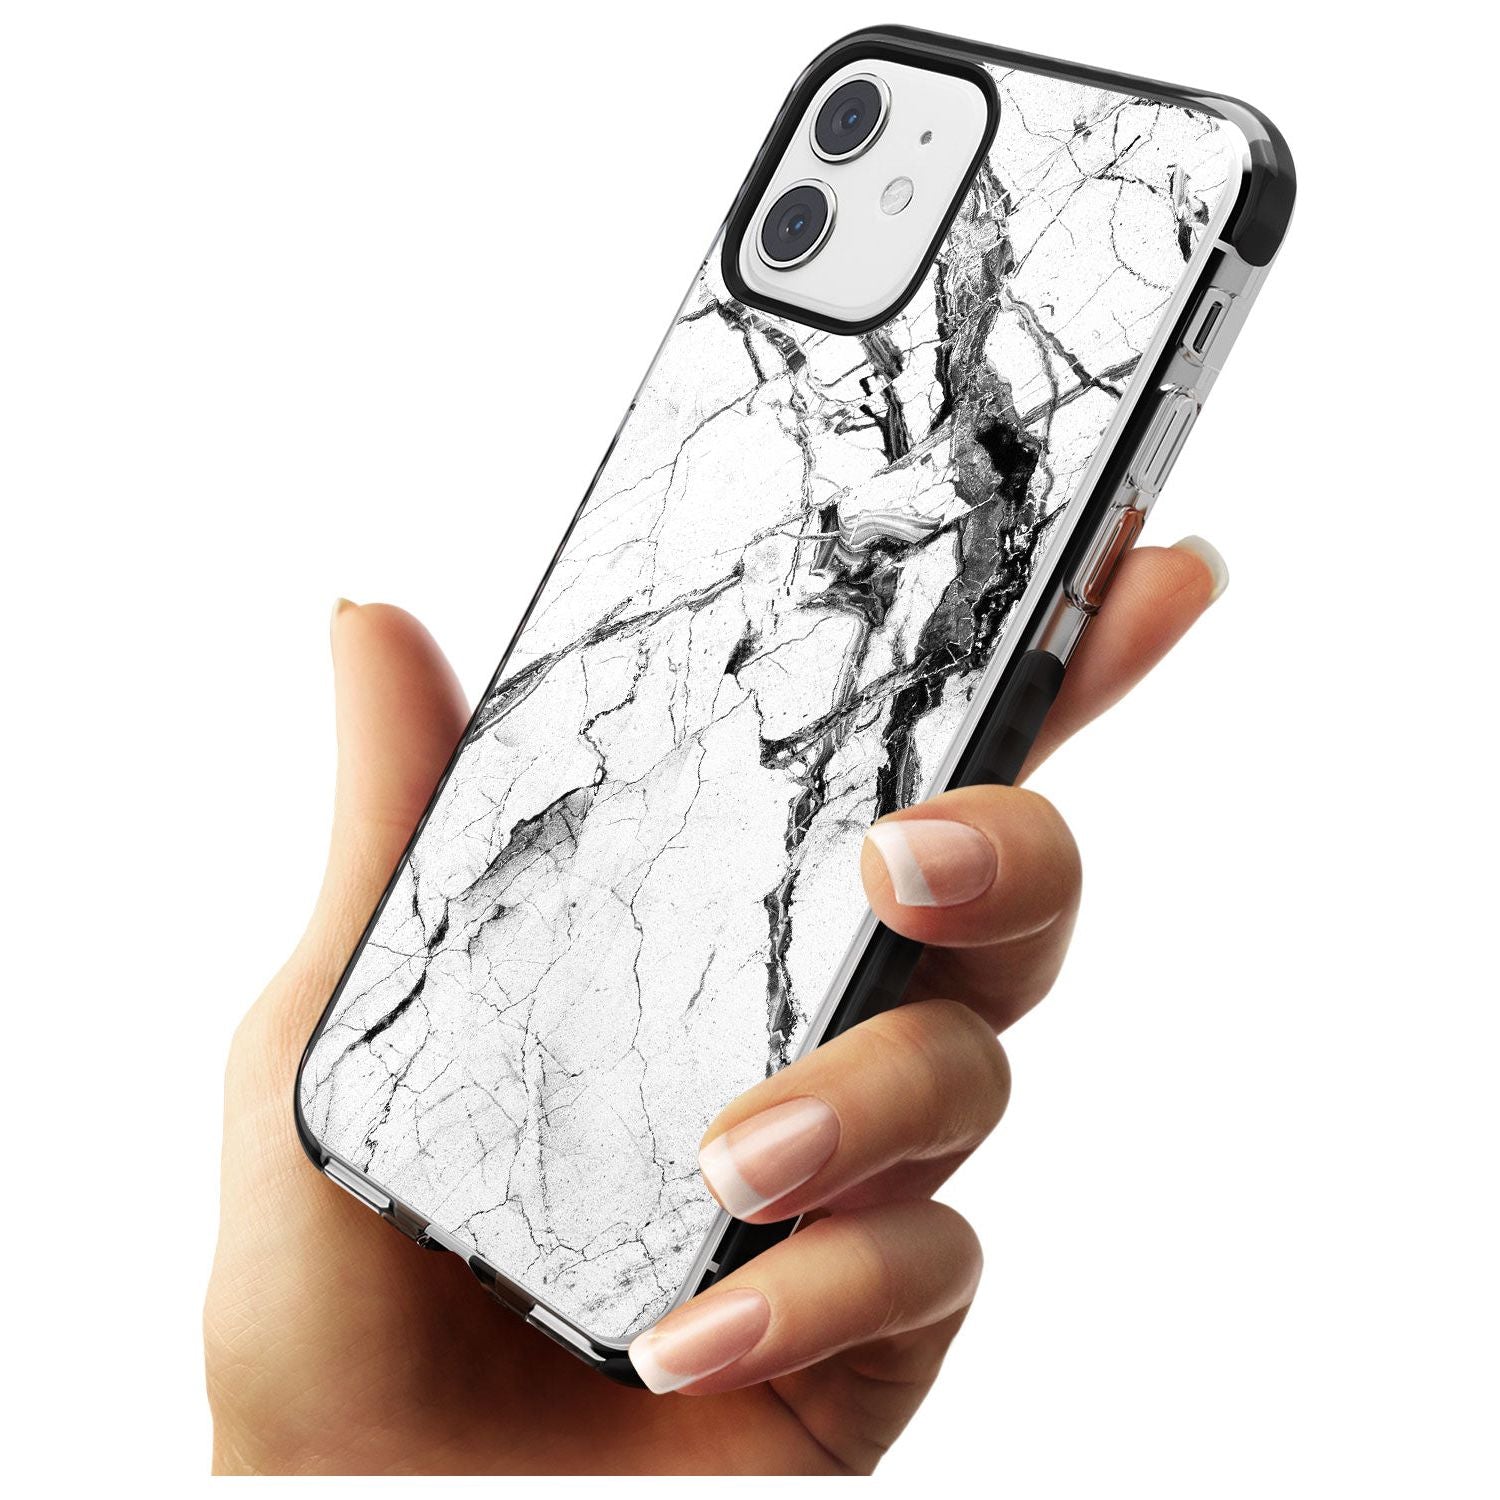 Black & White Stormy Marble Black Impact Phone Case for iPhone 11